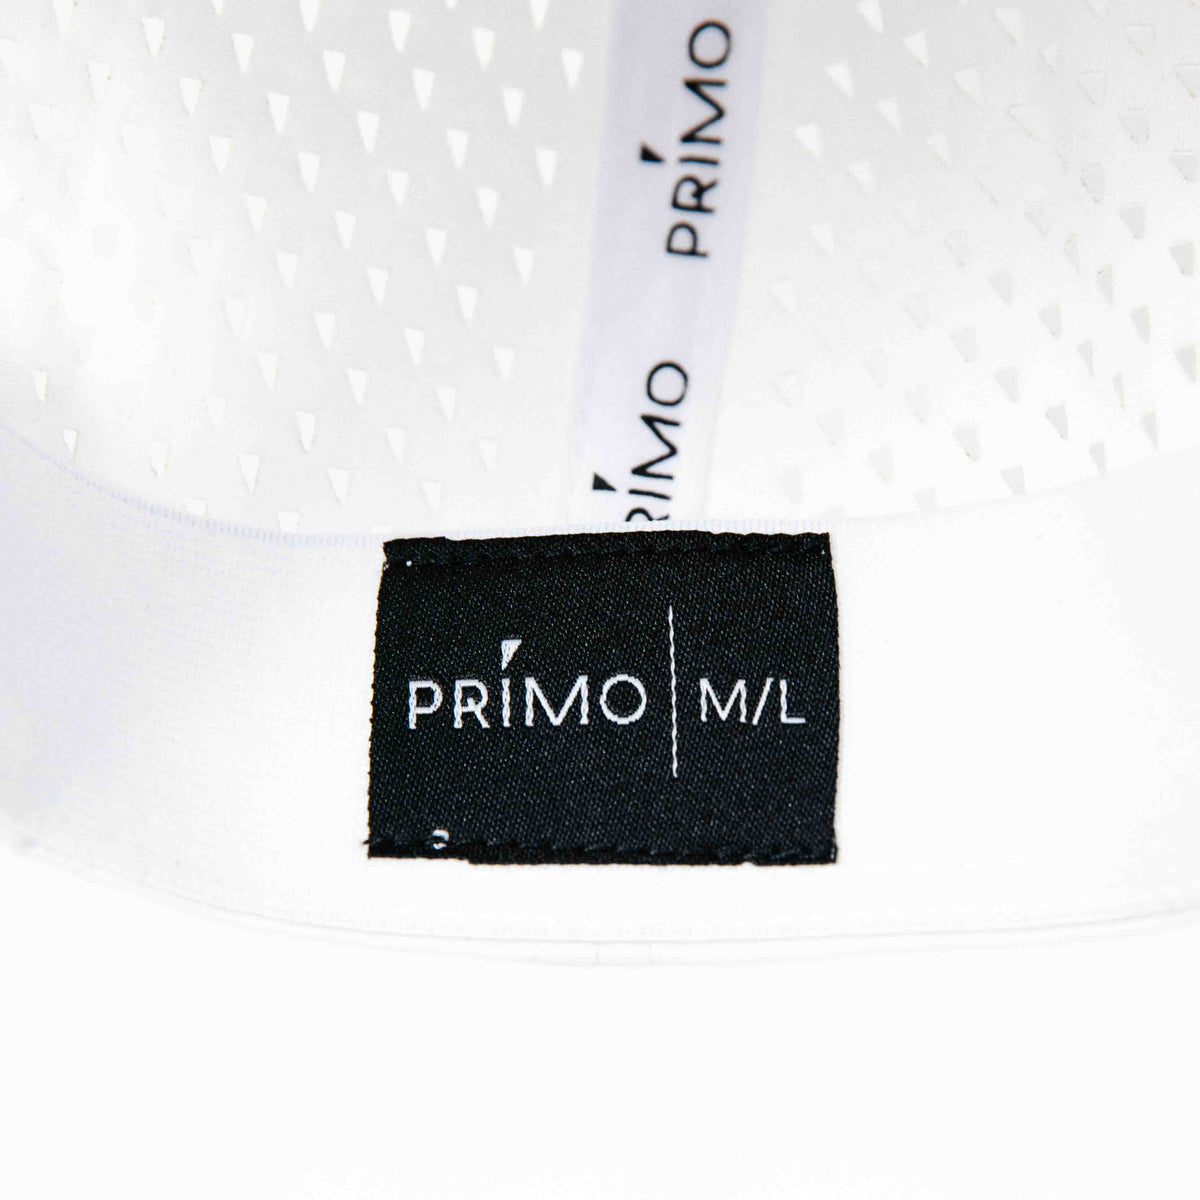 Primo GOLF hat White Sizing Tag